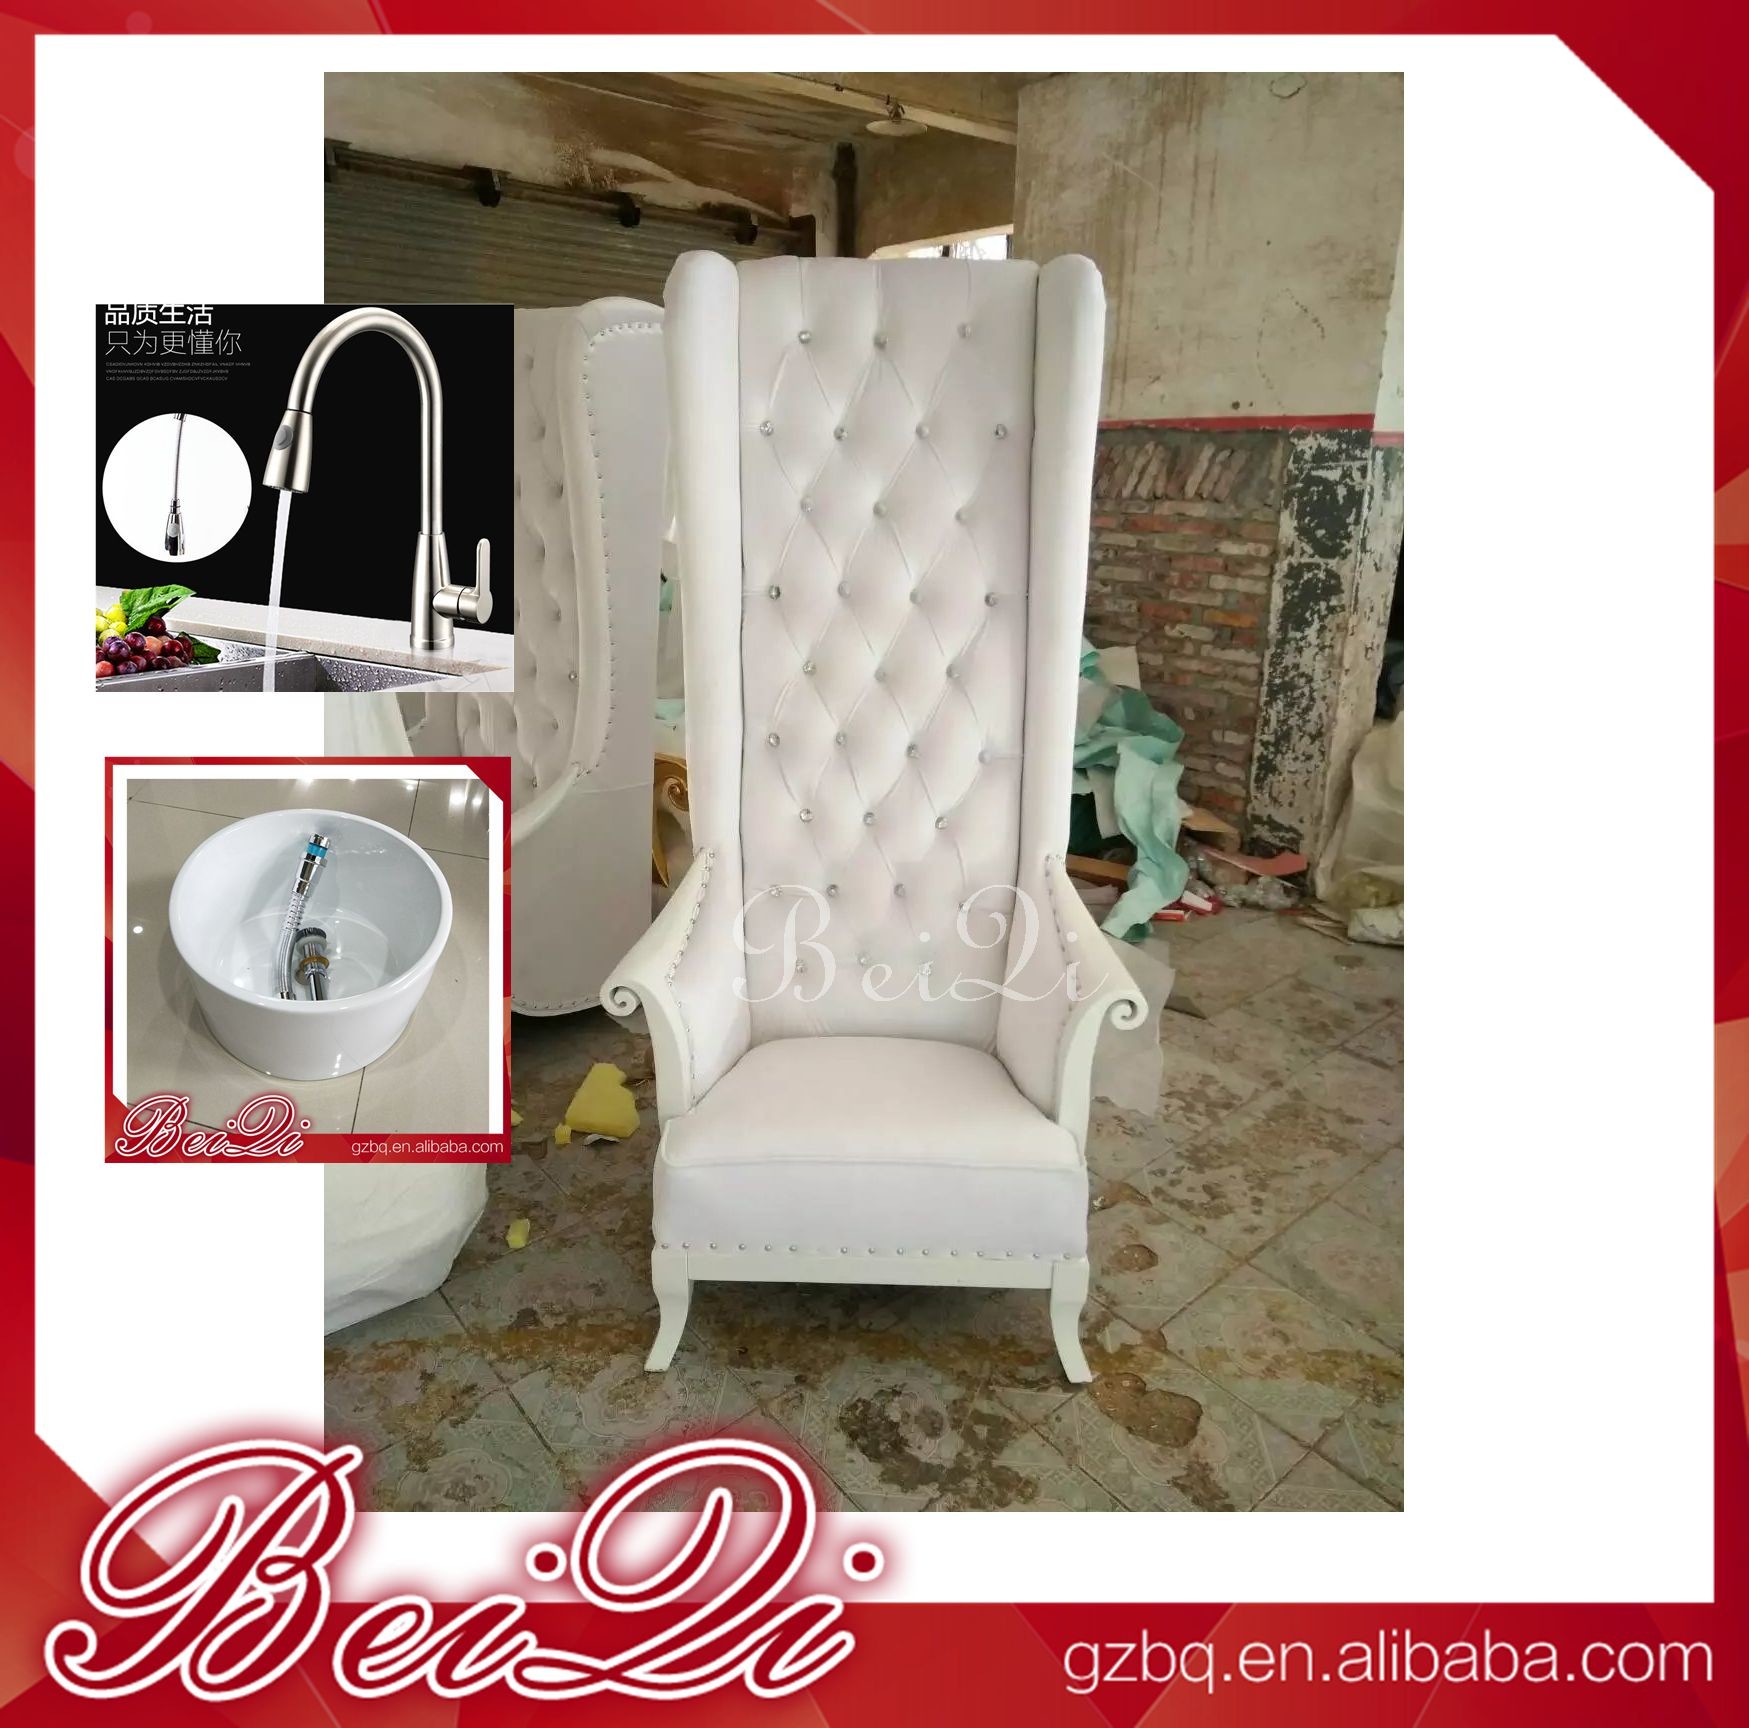 China Wholesales Salon Furniture Sets New Style Luxury Mssage Pedicure Chair in Dubai wholesale